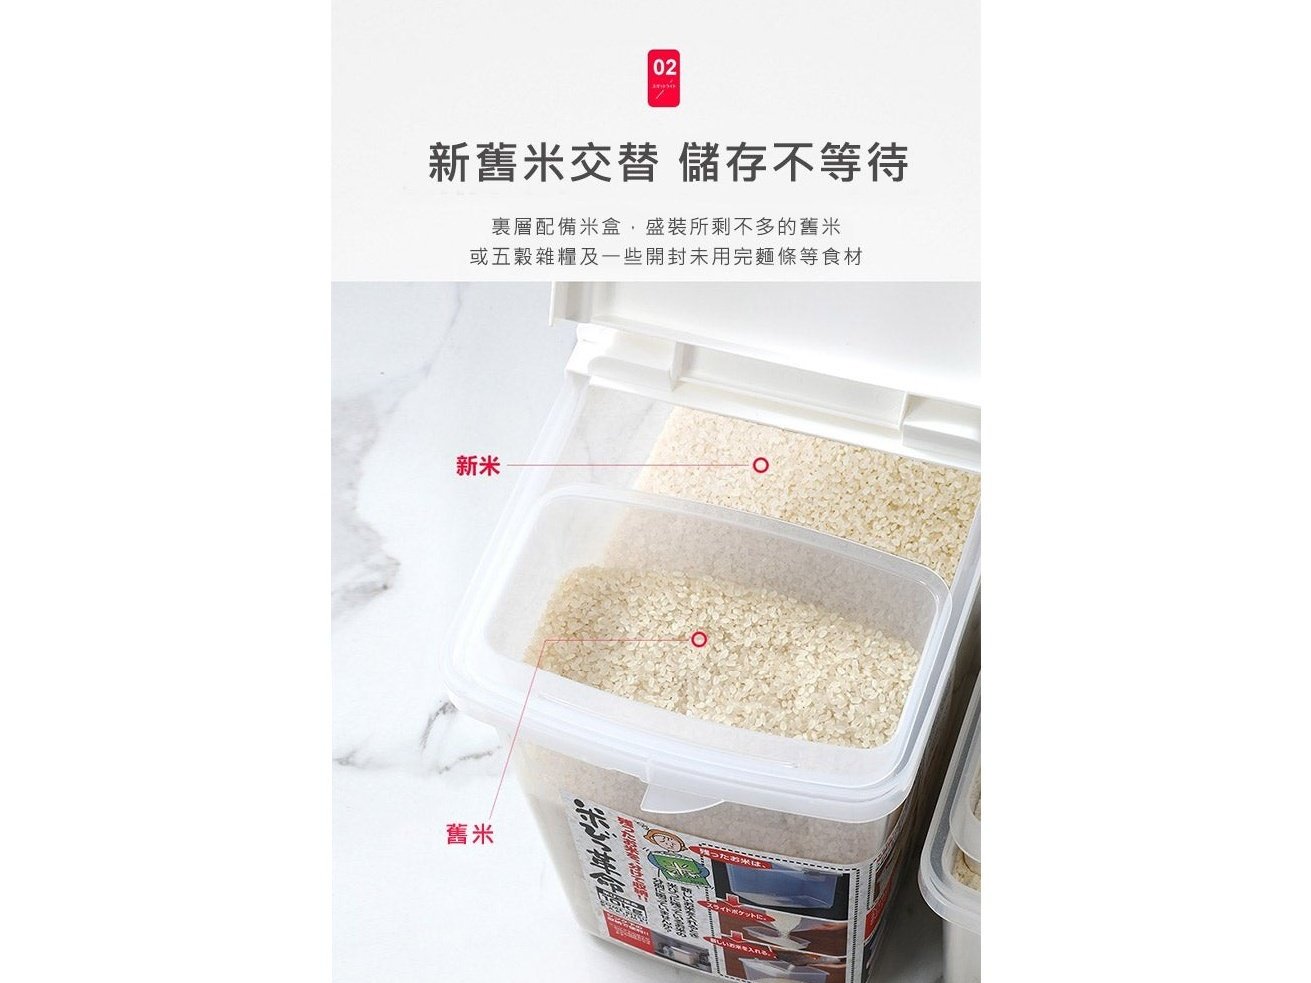 Rice Storage Container with Wheels 10kg